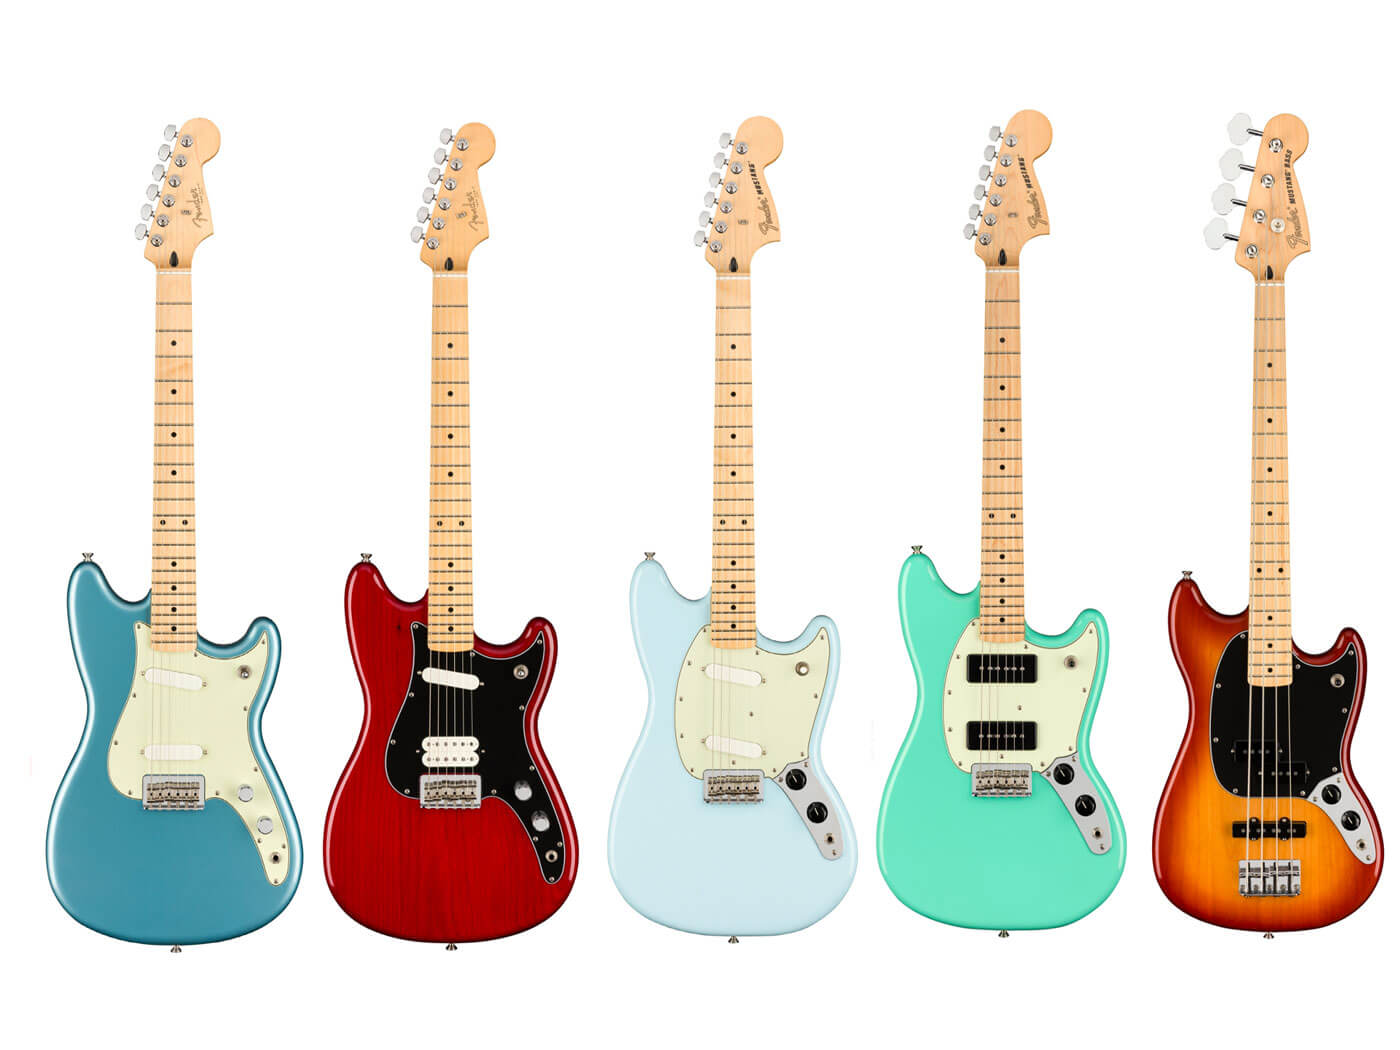 The new Fender Player Guitars